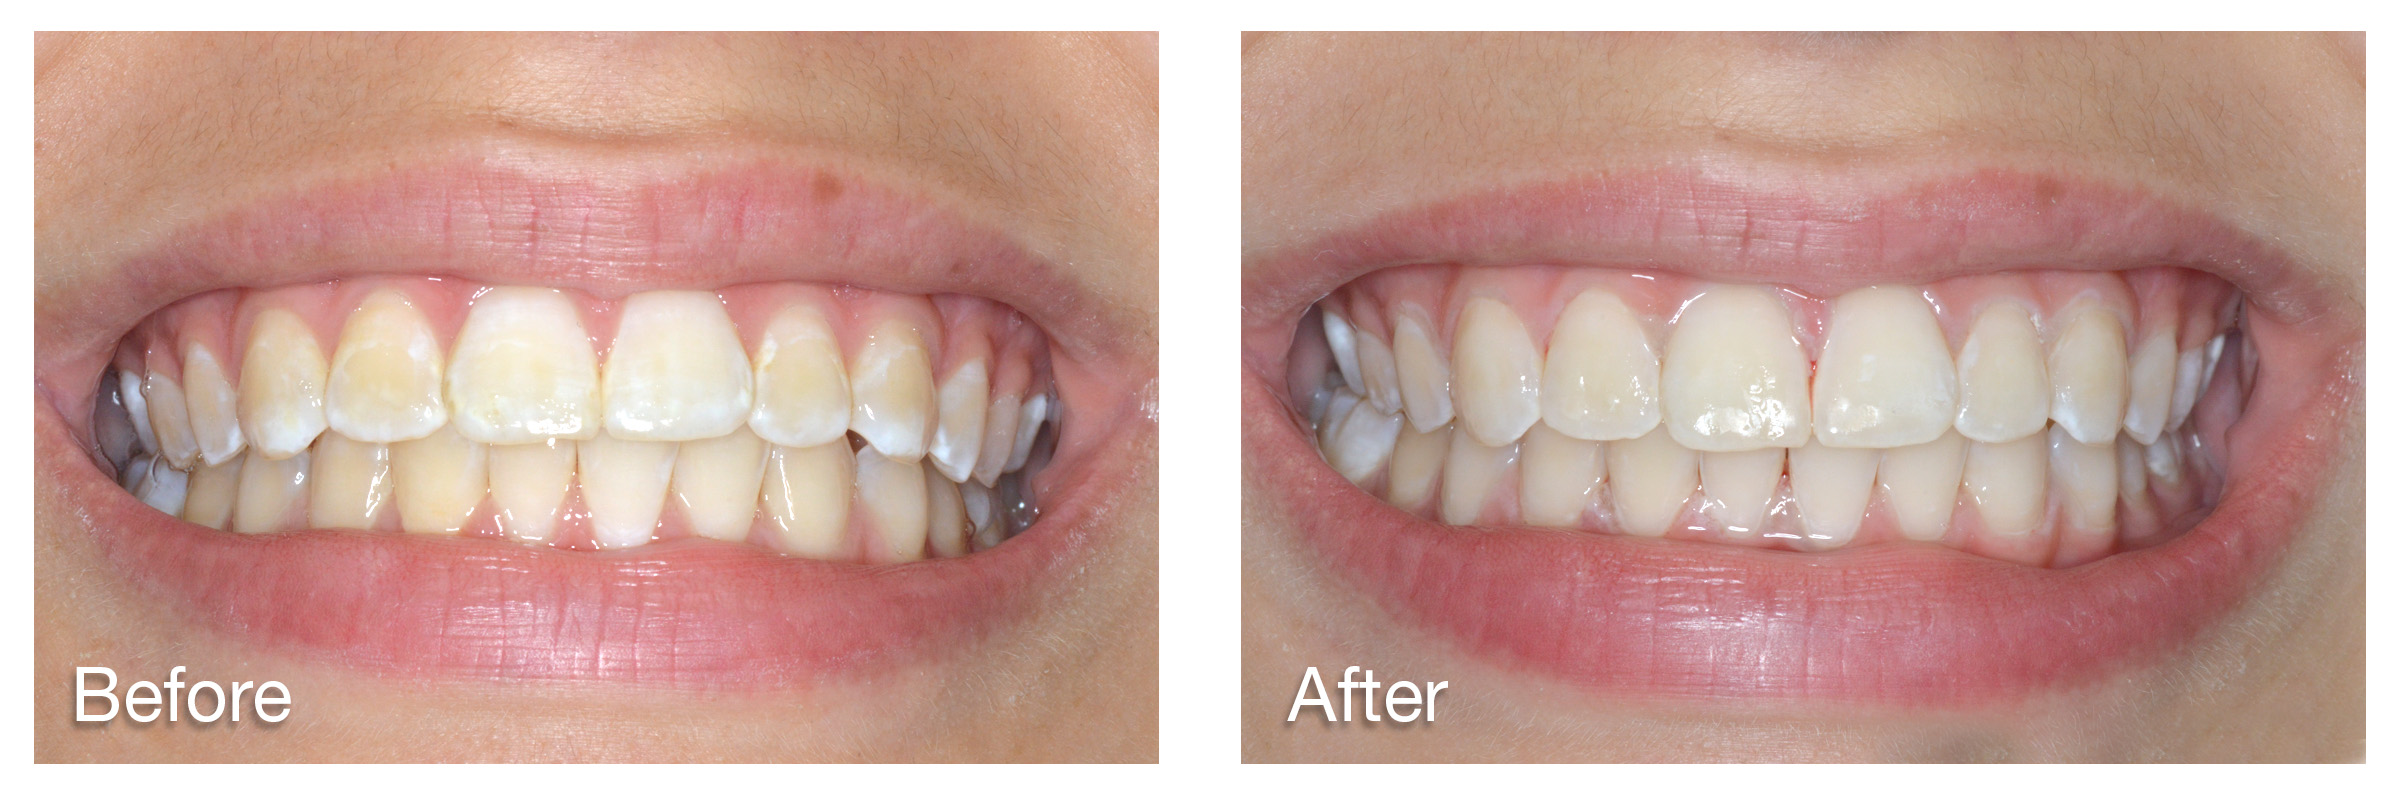 Chicago Style Smiles, Dr. Fisher, bonding, dental, cosmetic dentistry, space between teeth, painless, white spots